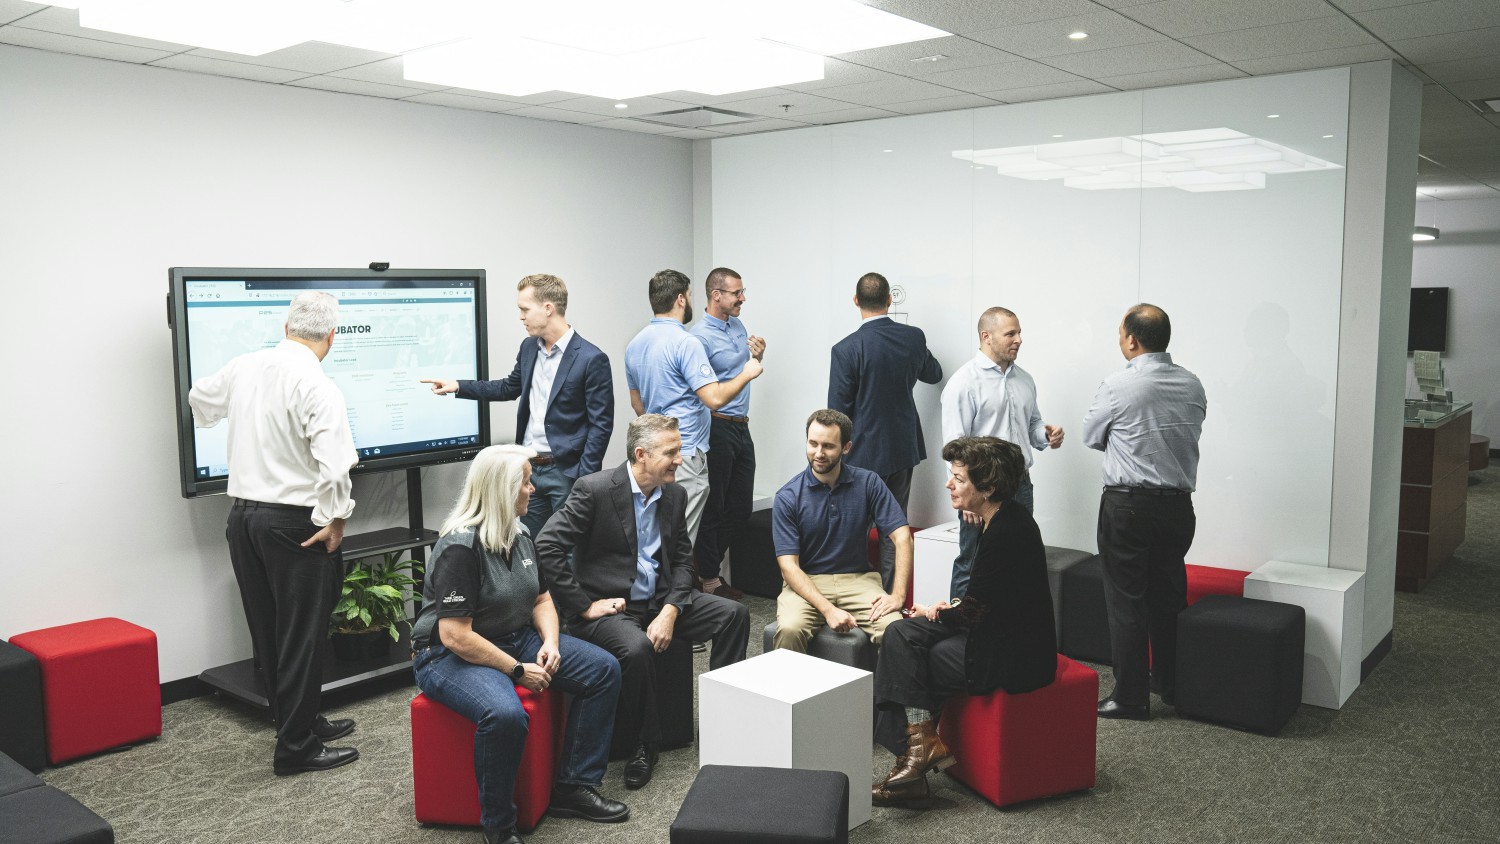 Our meeting rooms include high-tech touchscreens for presentations and collaboration. 